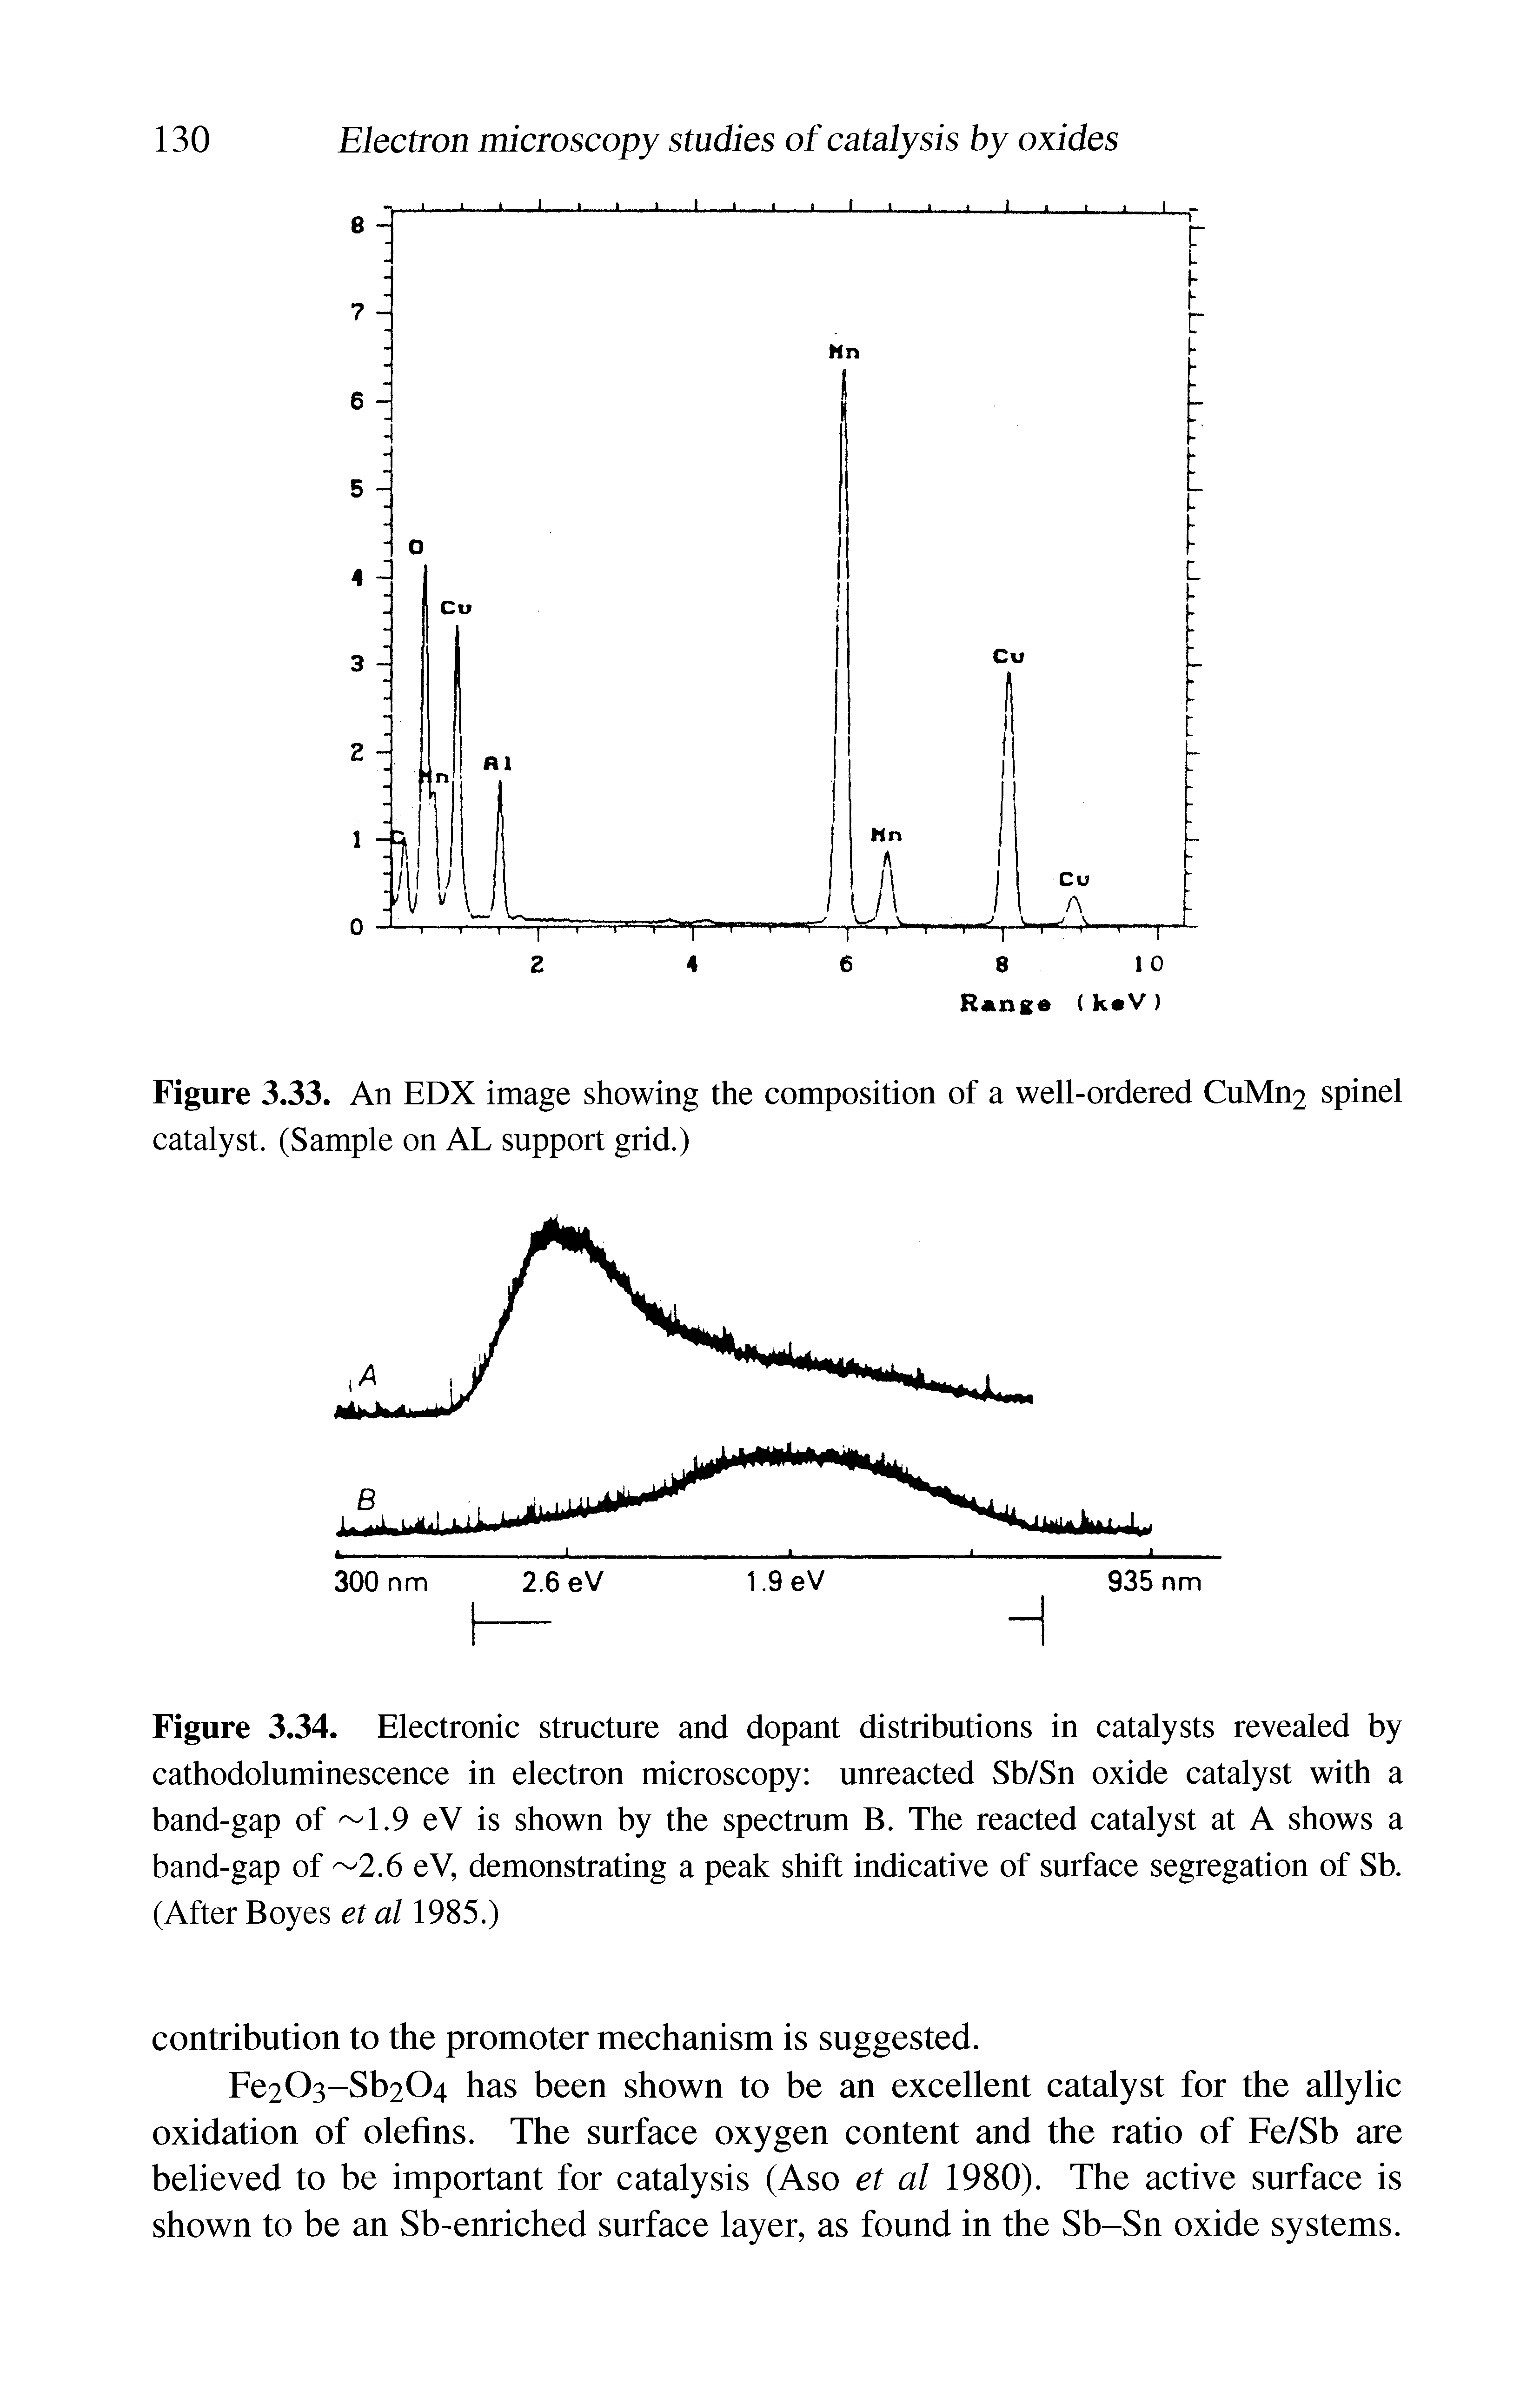 Figure 3.34. Electronic structure and dopant distributions in catalysts revealed by cathodoluminescence in electron microscopy unreacted Sb/Sn oxide catalyst with a band-gap of 1.9 eV is shown by the spectrum B. The reacted catalyst at A shows a band-gap of 2.6 eV, demonstrating a peak shift indicative of surface segregation of Sb. (After Boyes et al 1985.)...